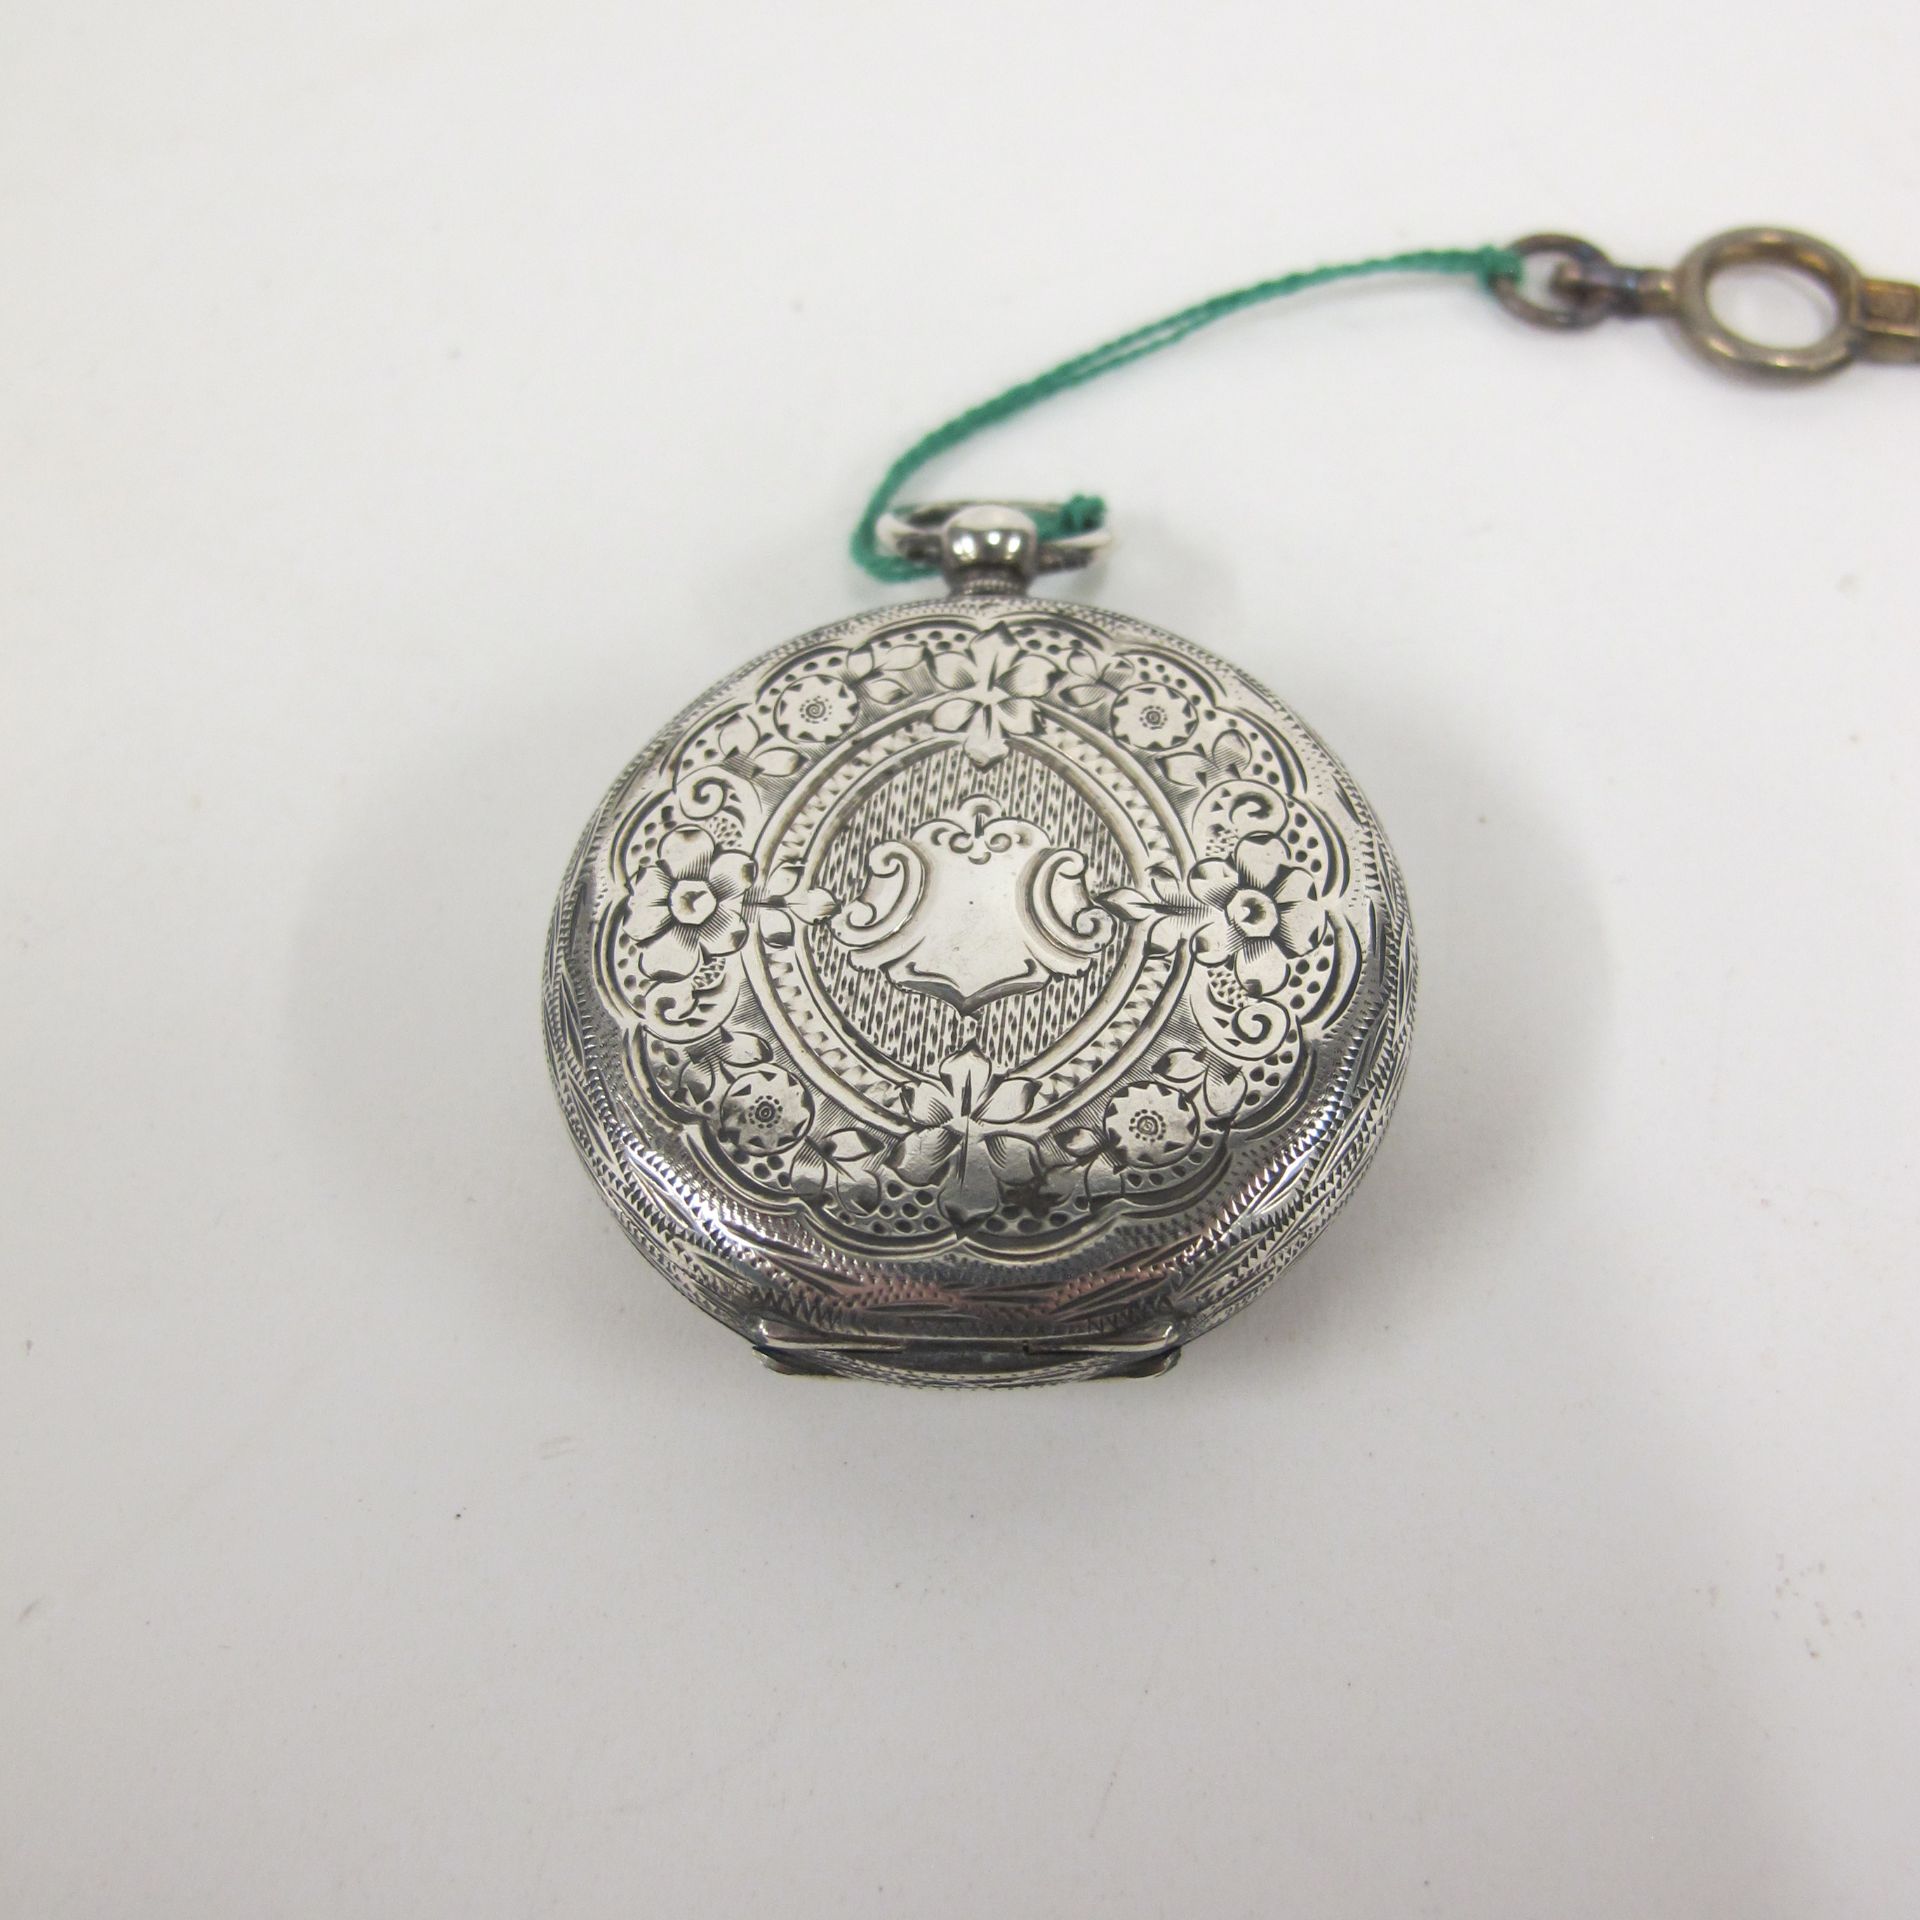 Antique Swiss Silver Fob Watch in a Tortoiseshell Antique Case (est £80-£120) - Image 4 of 7